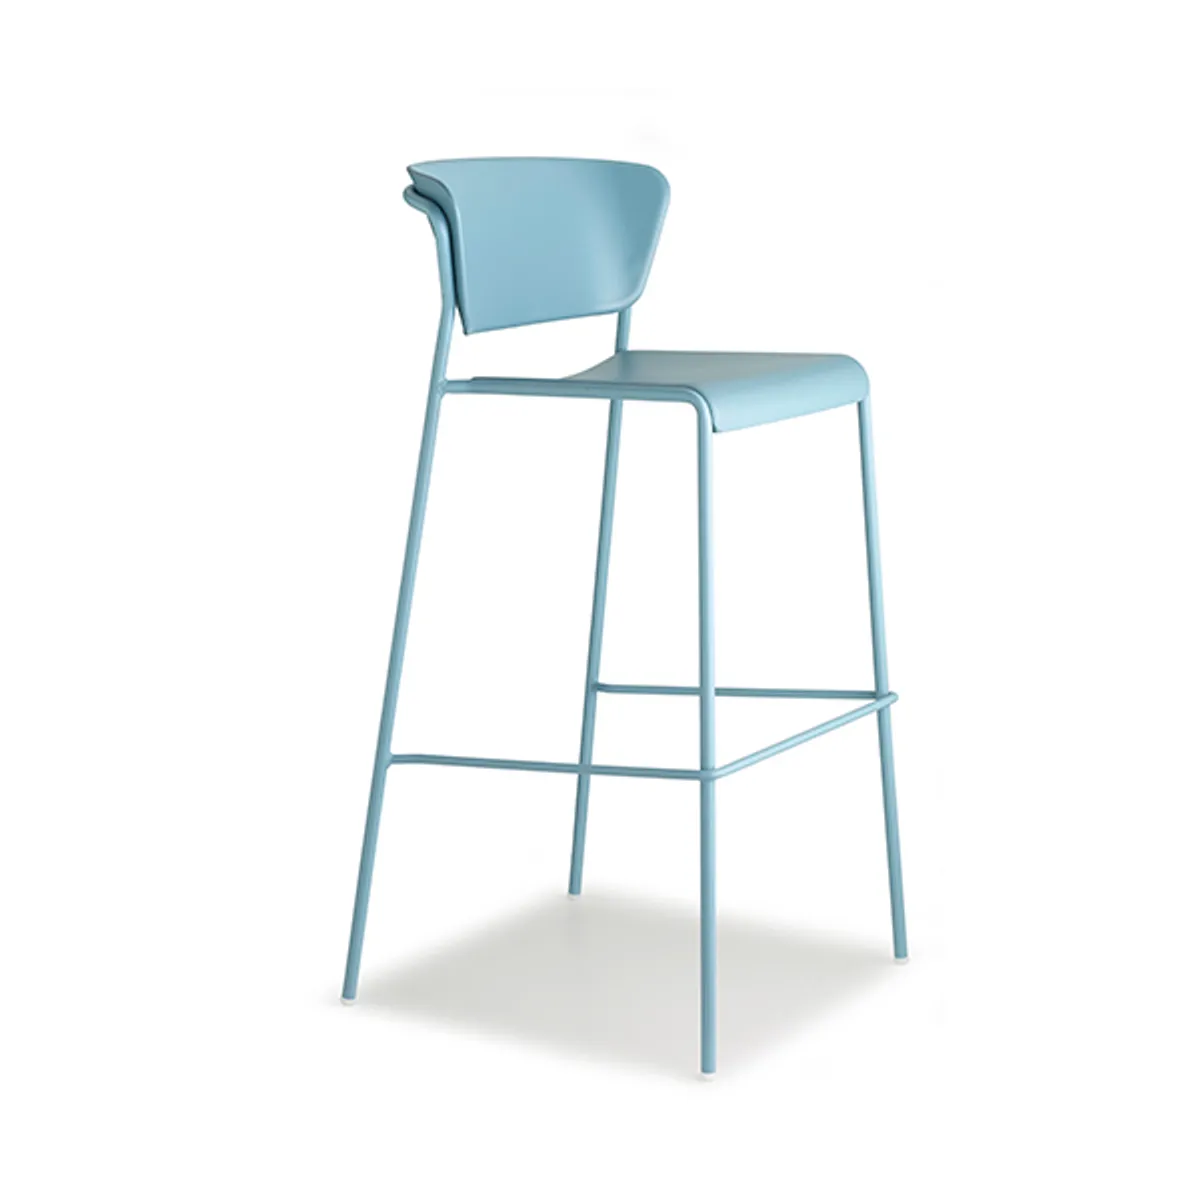 Robyn Soft Outdoor Bar Stool Cafe Furniture Insideoutcontracts 023